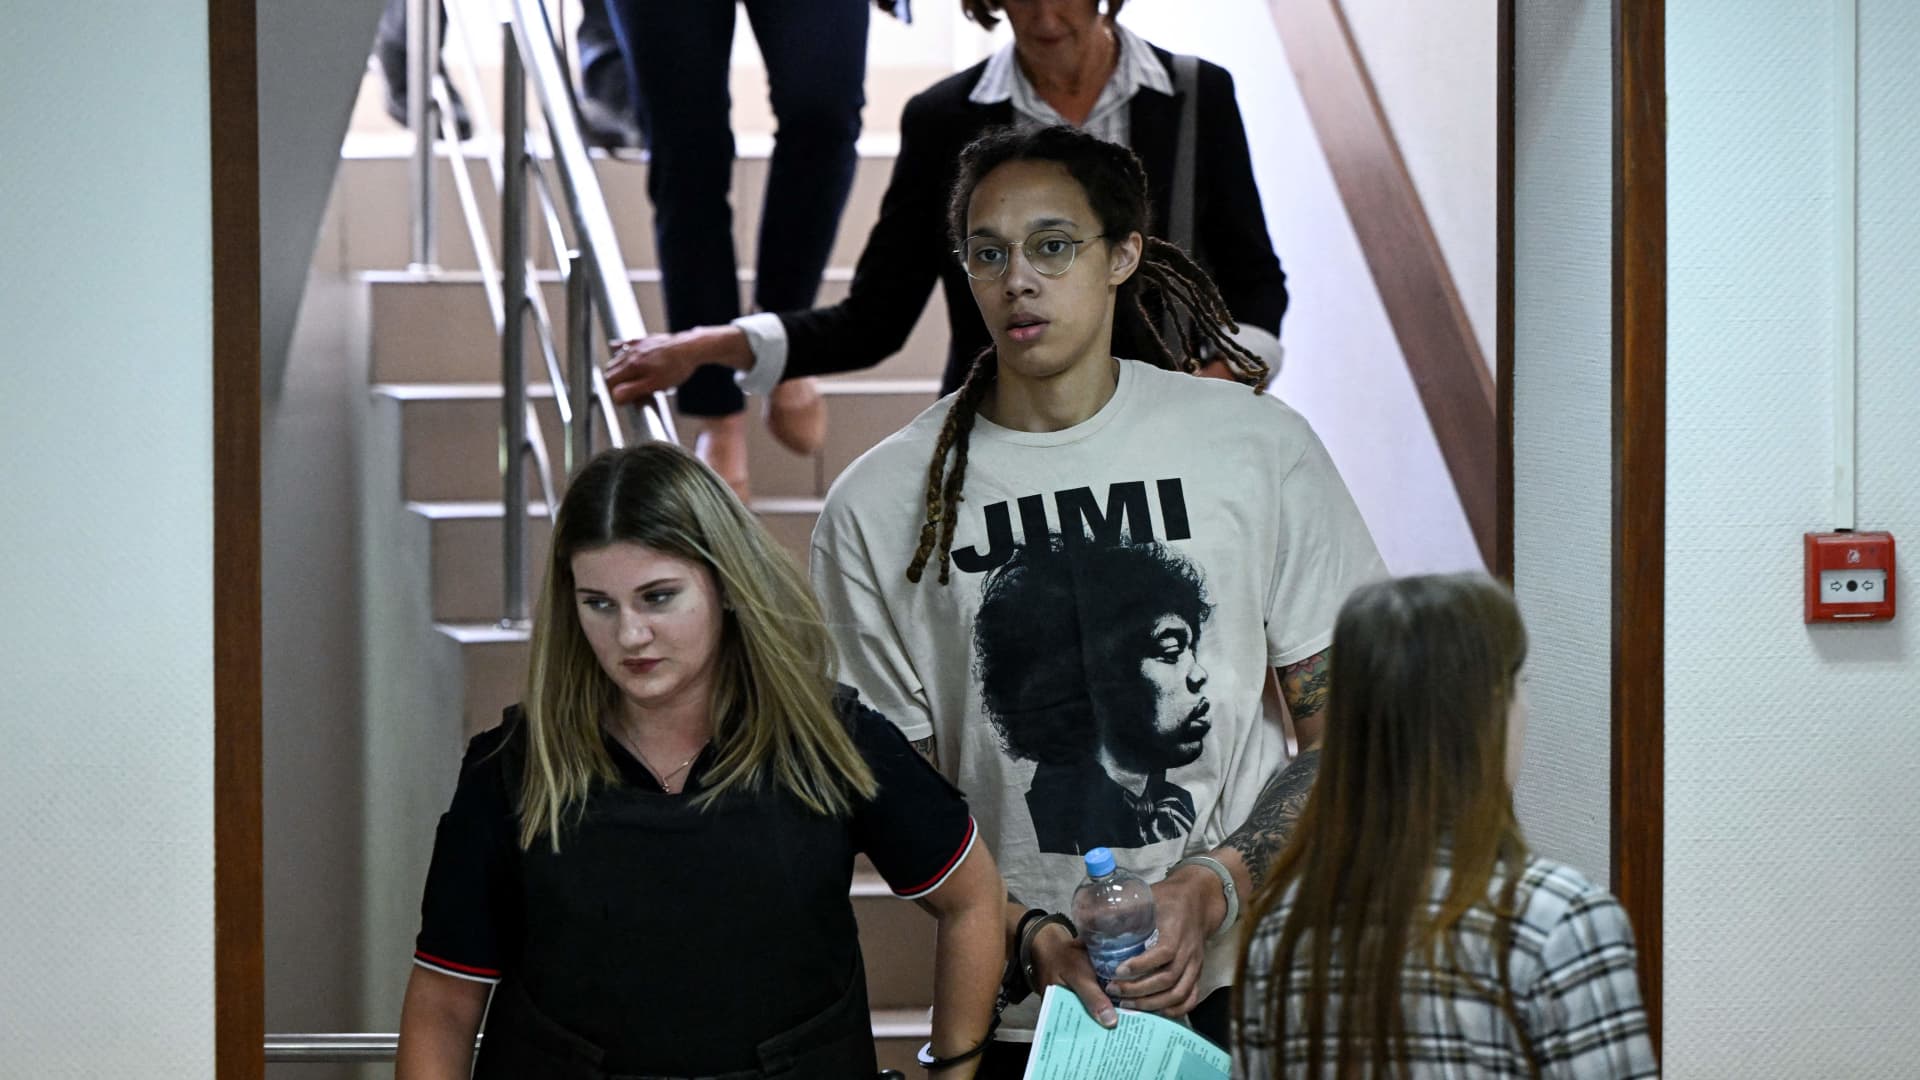 US WNBA basketball superstar Brittney Griner (C) arrives to a hearing at the Khimki Court, outside Moscow on July 1, 2022.